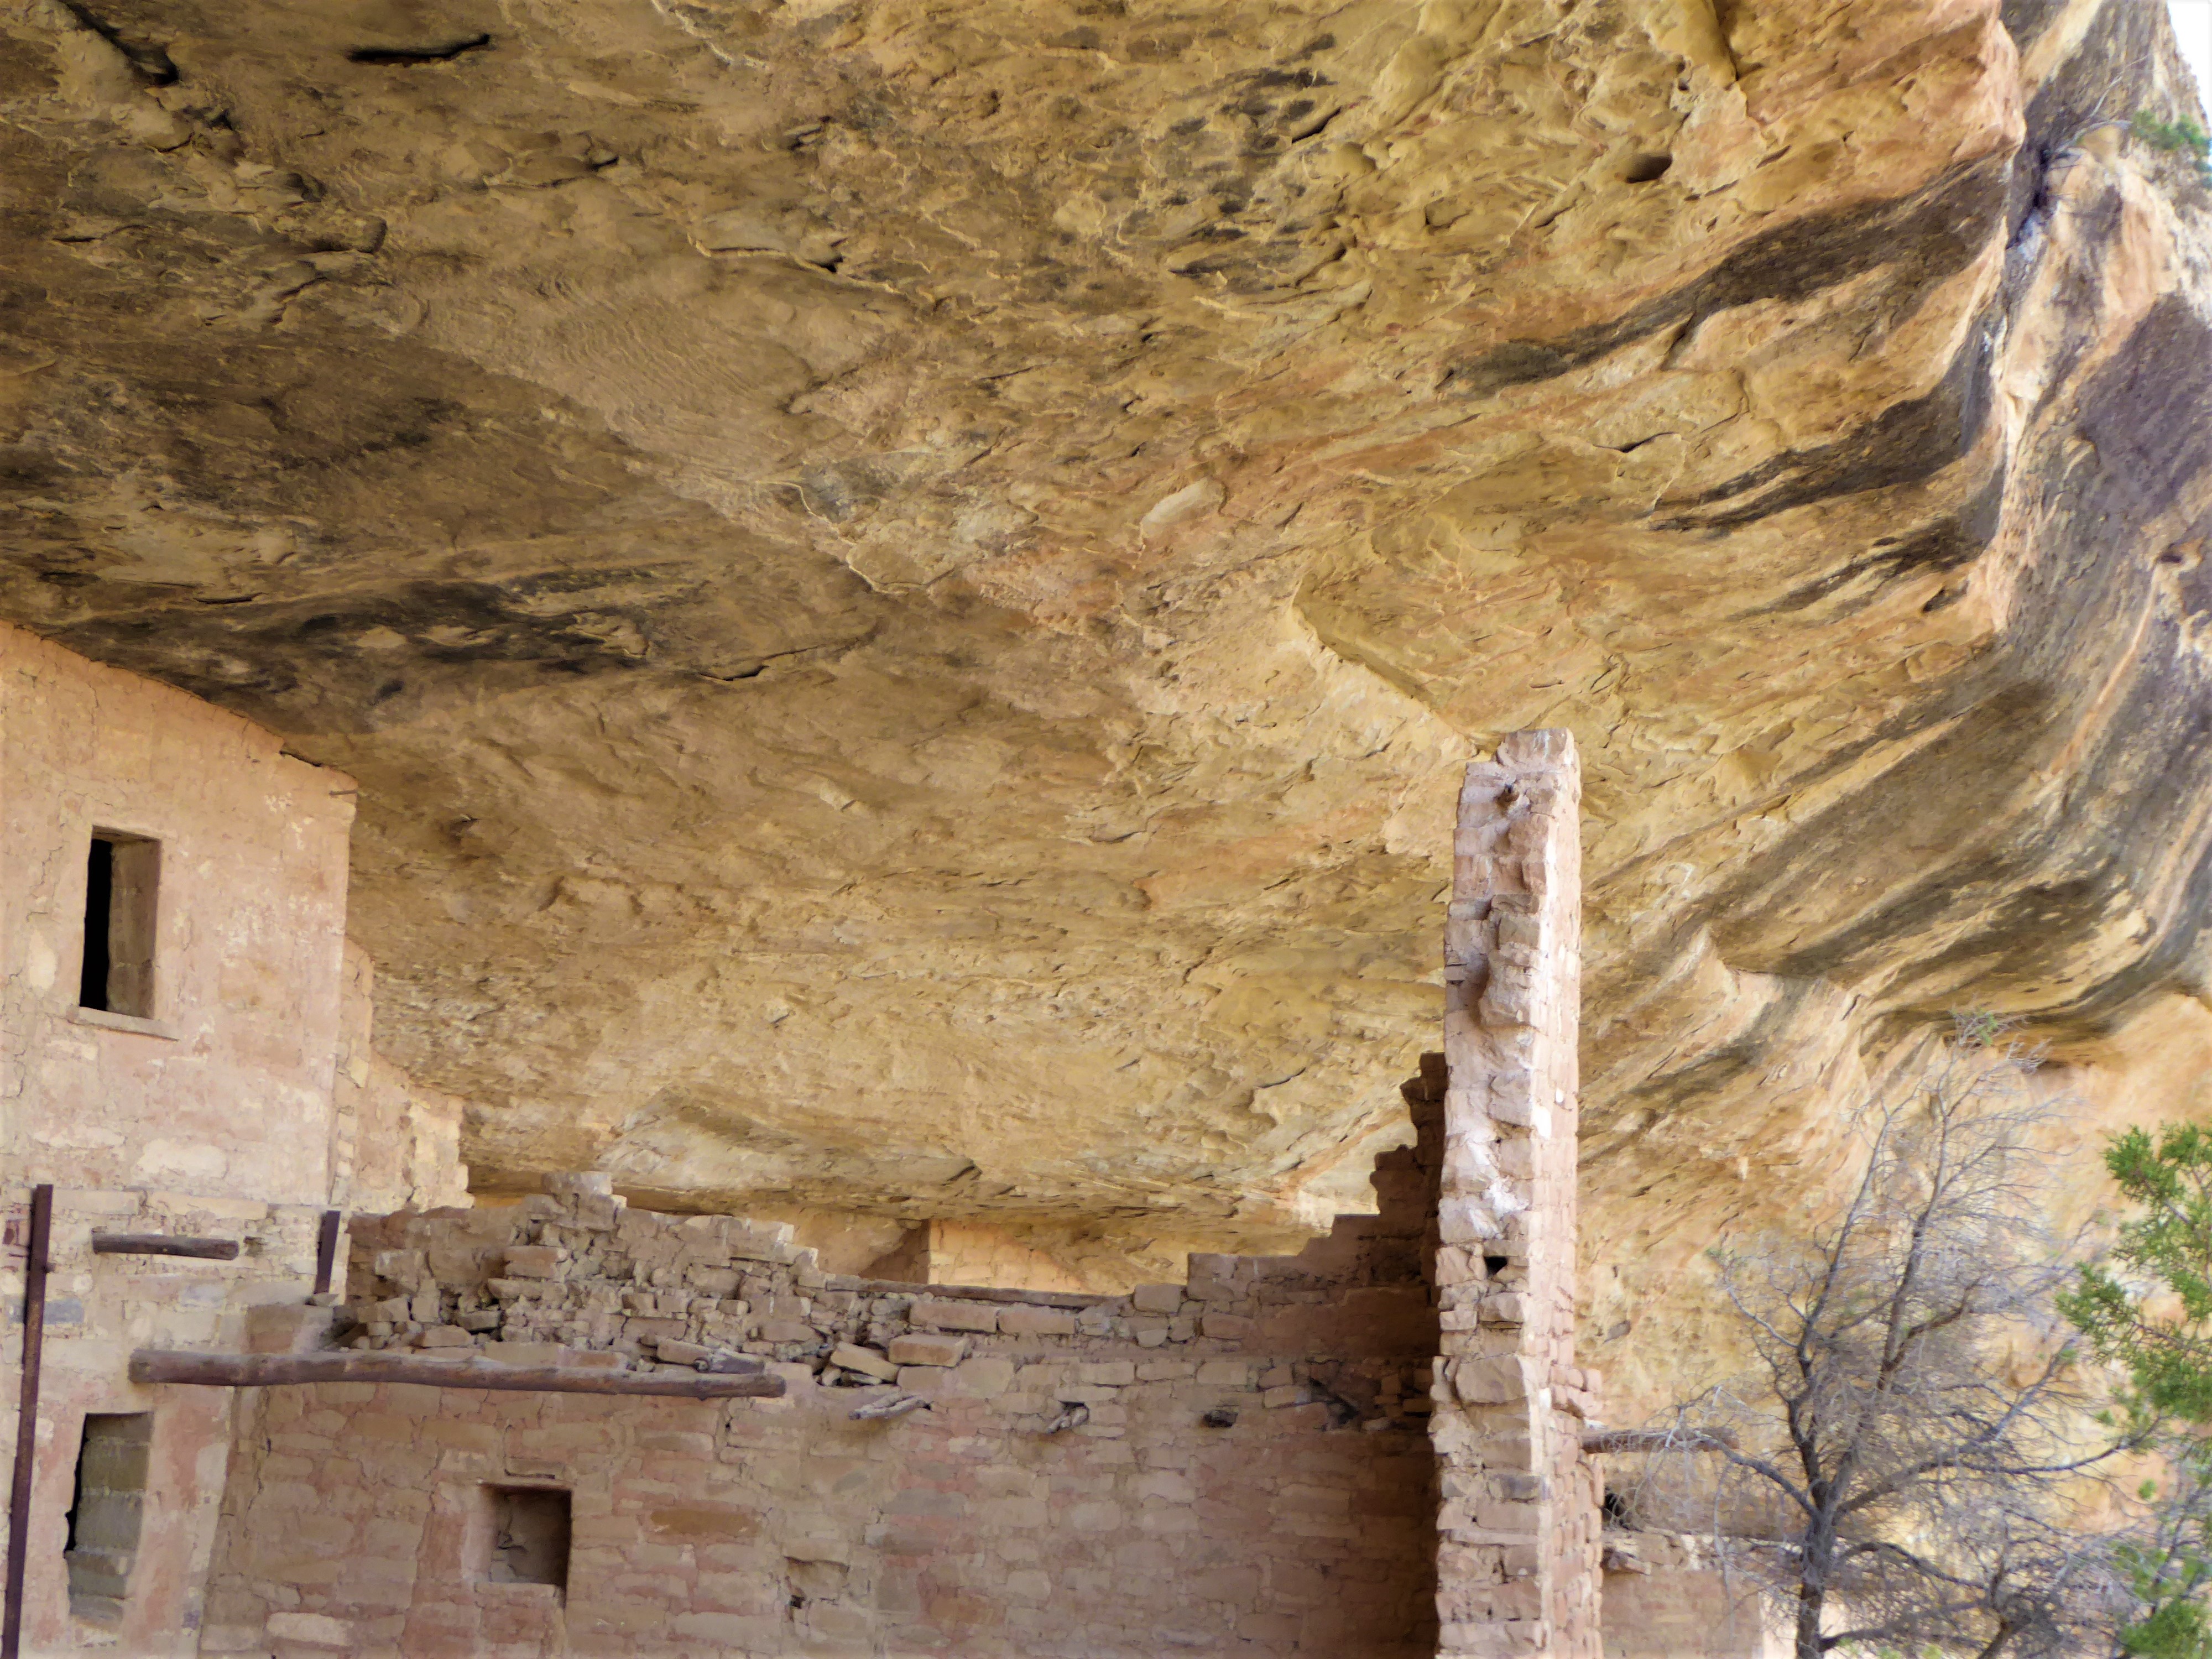 We Survived The Balcony House Tour at Mesa Verde